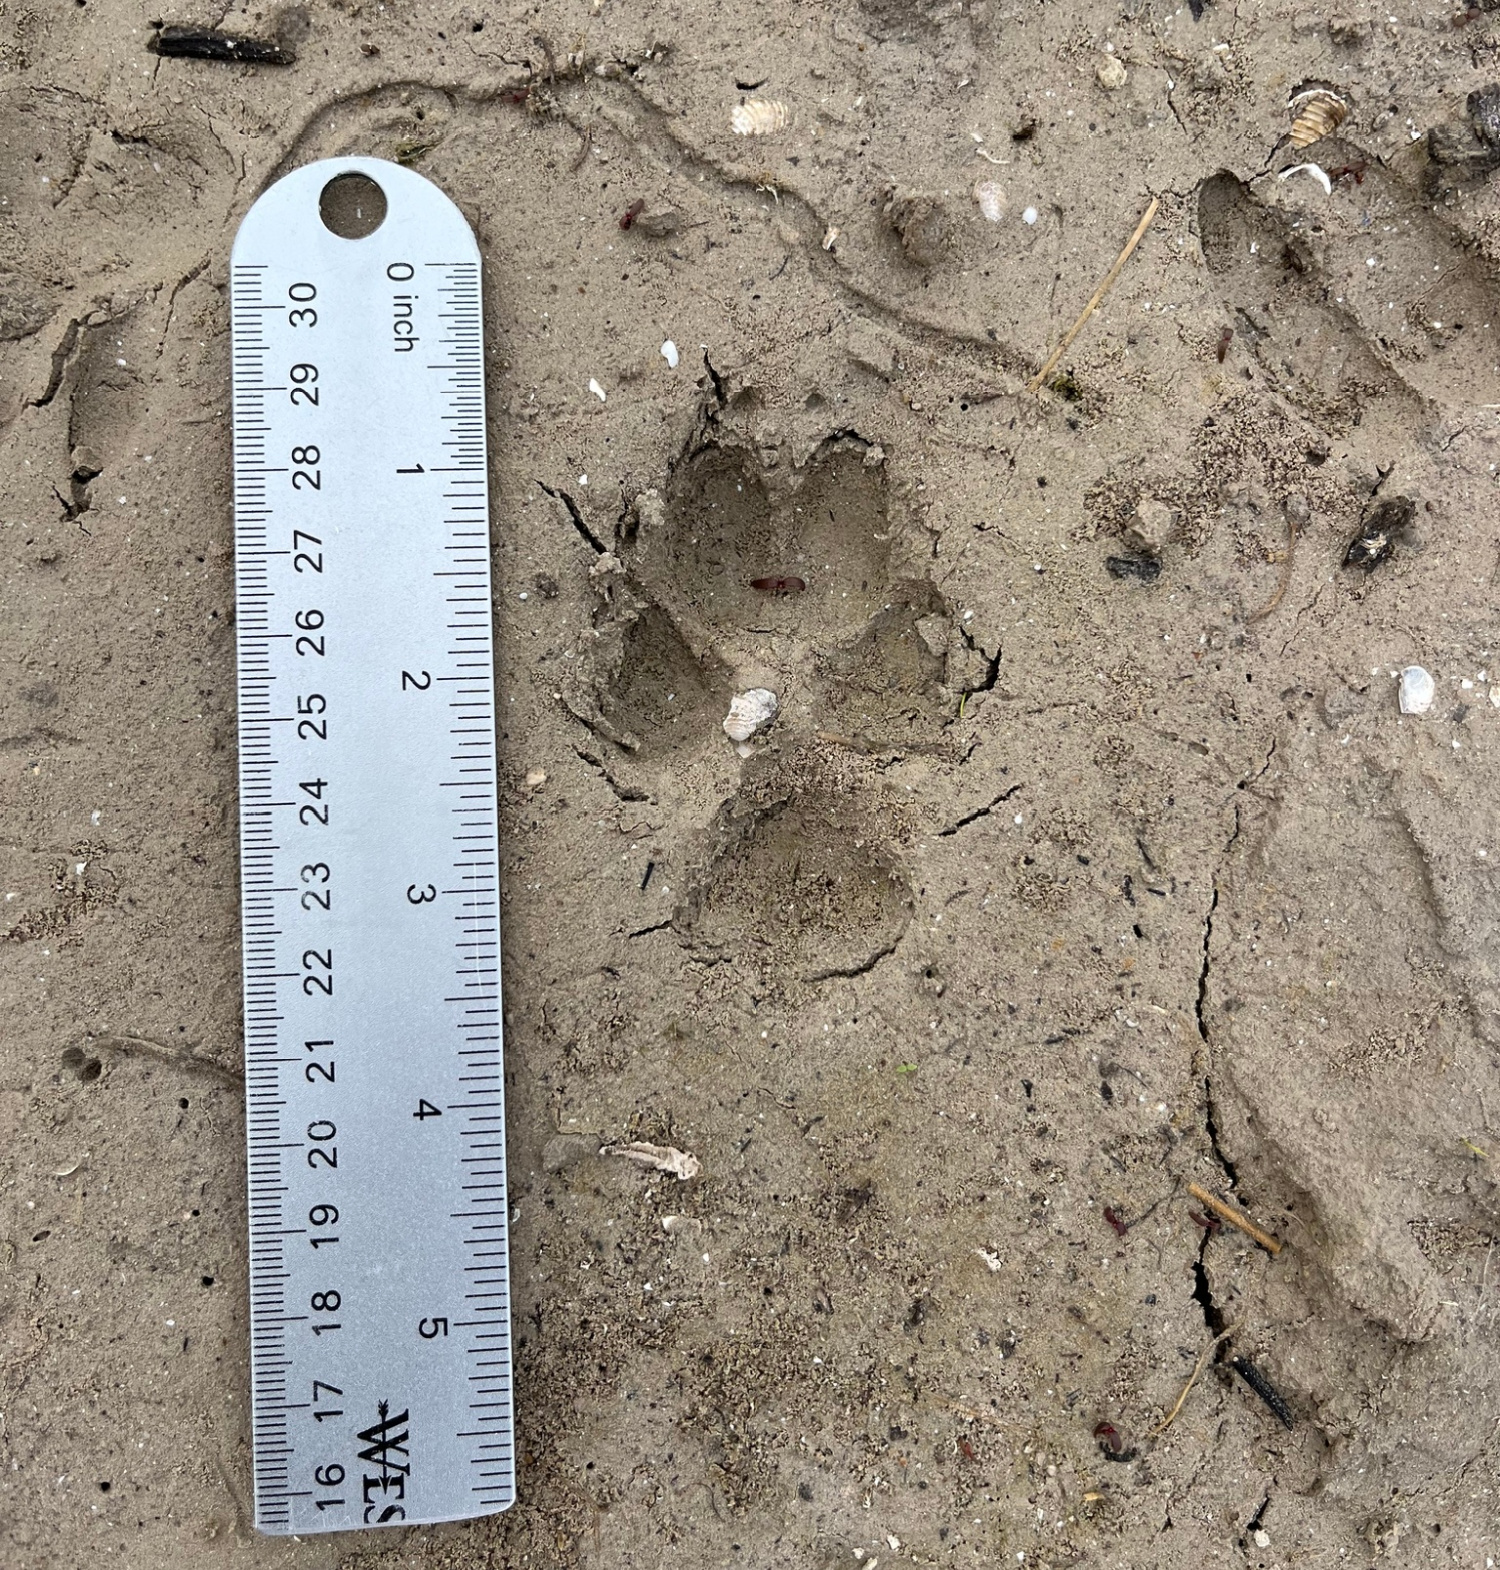 A coyote track is imprinted in mud next to a ruler.